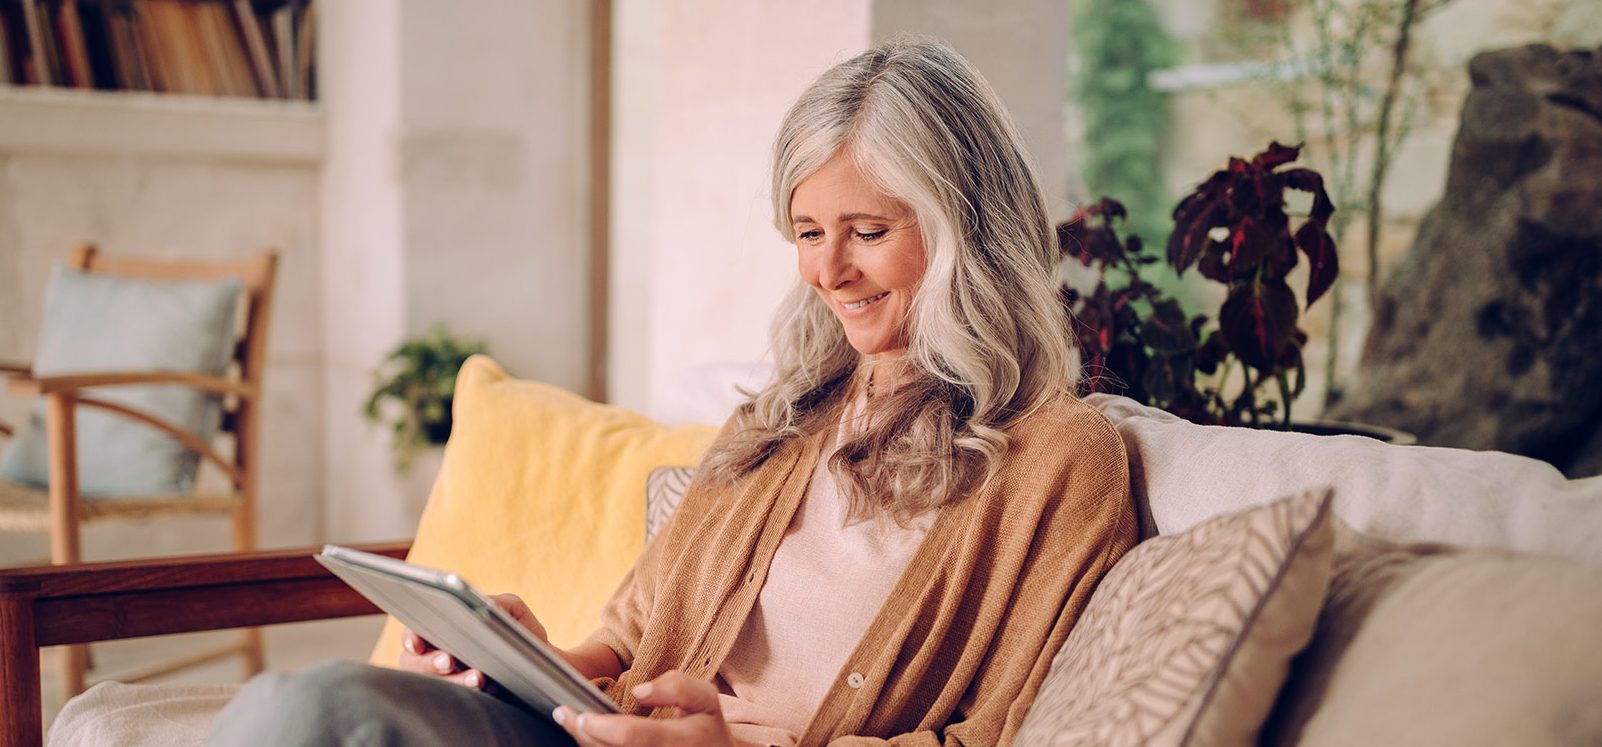 senior woman sitting on a couch smiling and looking at her tablet